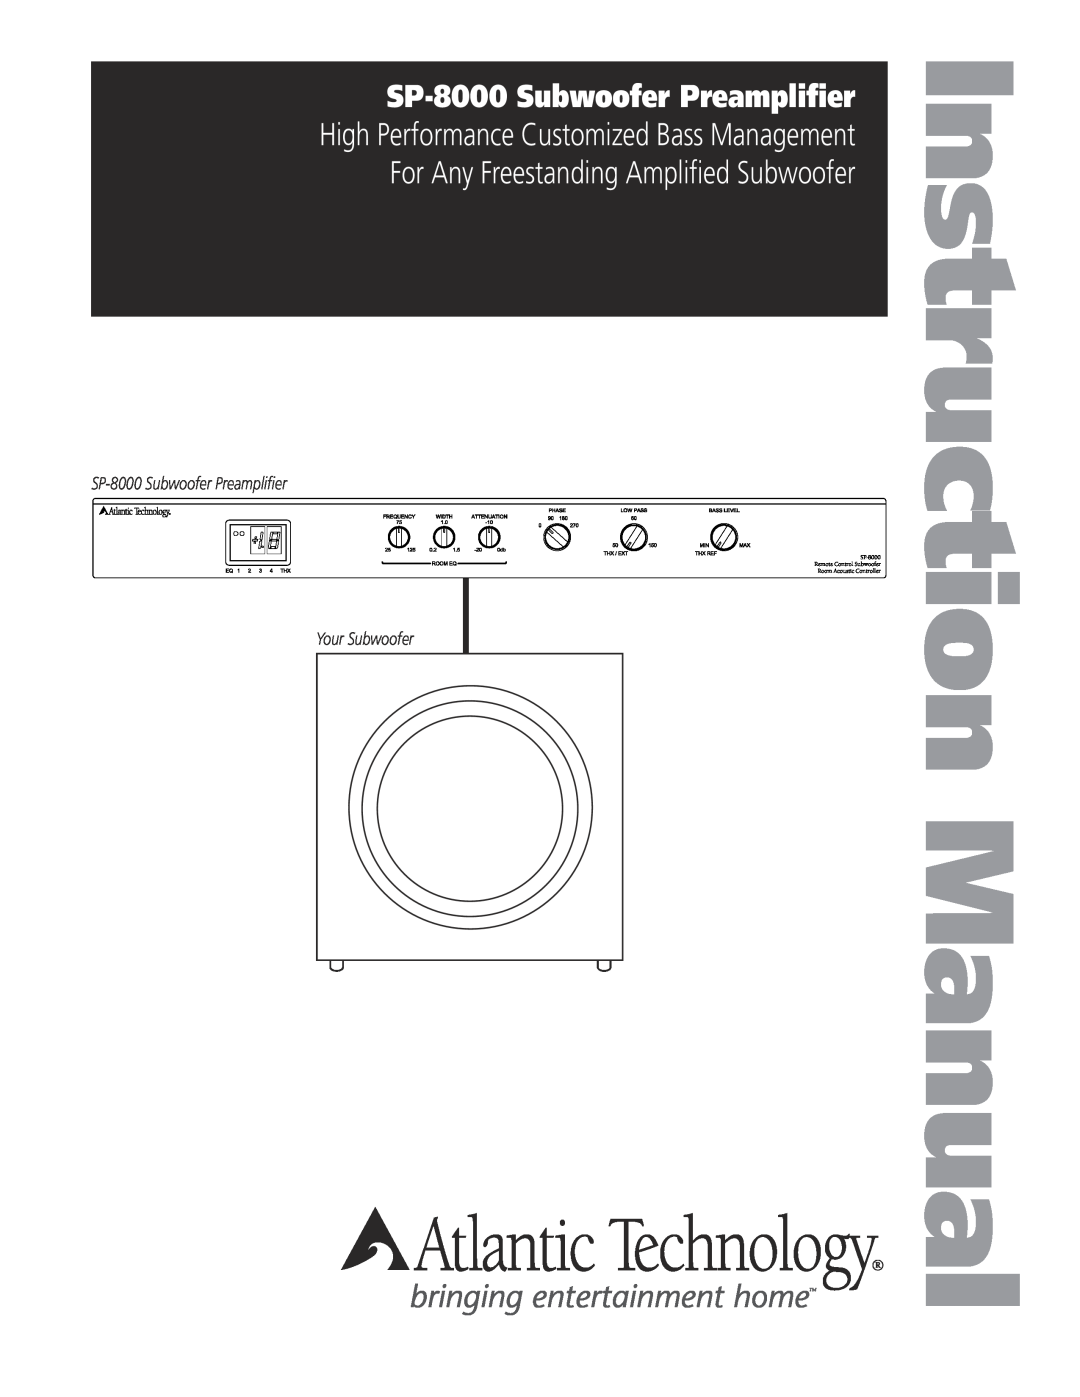 Atlantic Technology instruction manual SP-8000Subwoofer Preamplifier, For Any Freestanding Amplified Subwoofer 